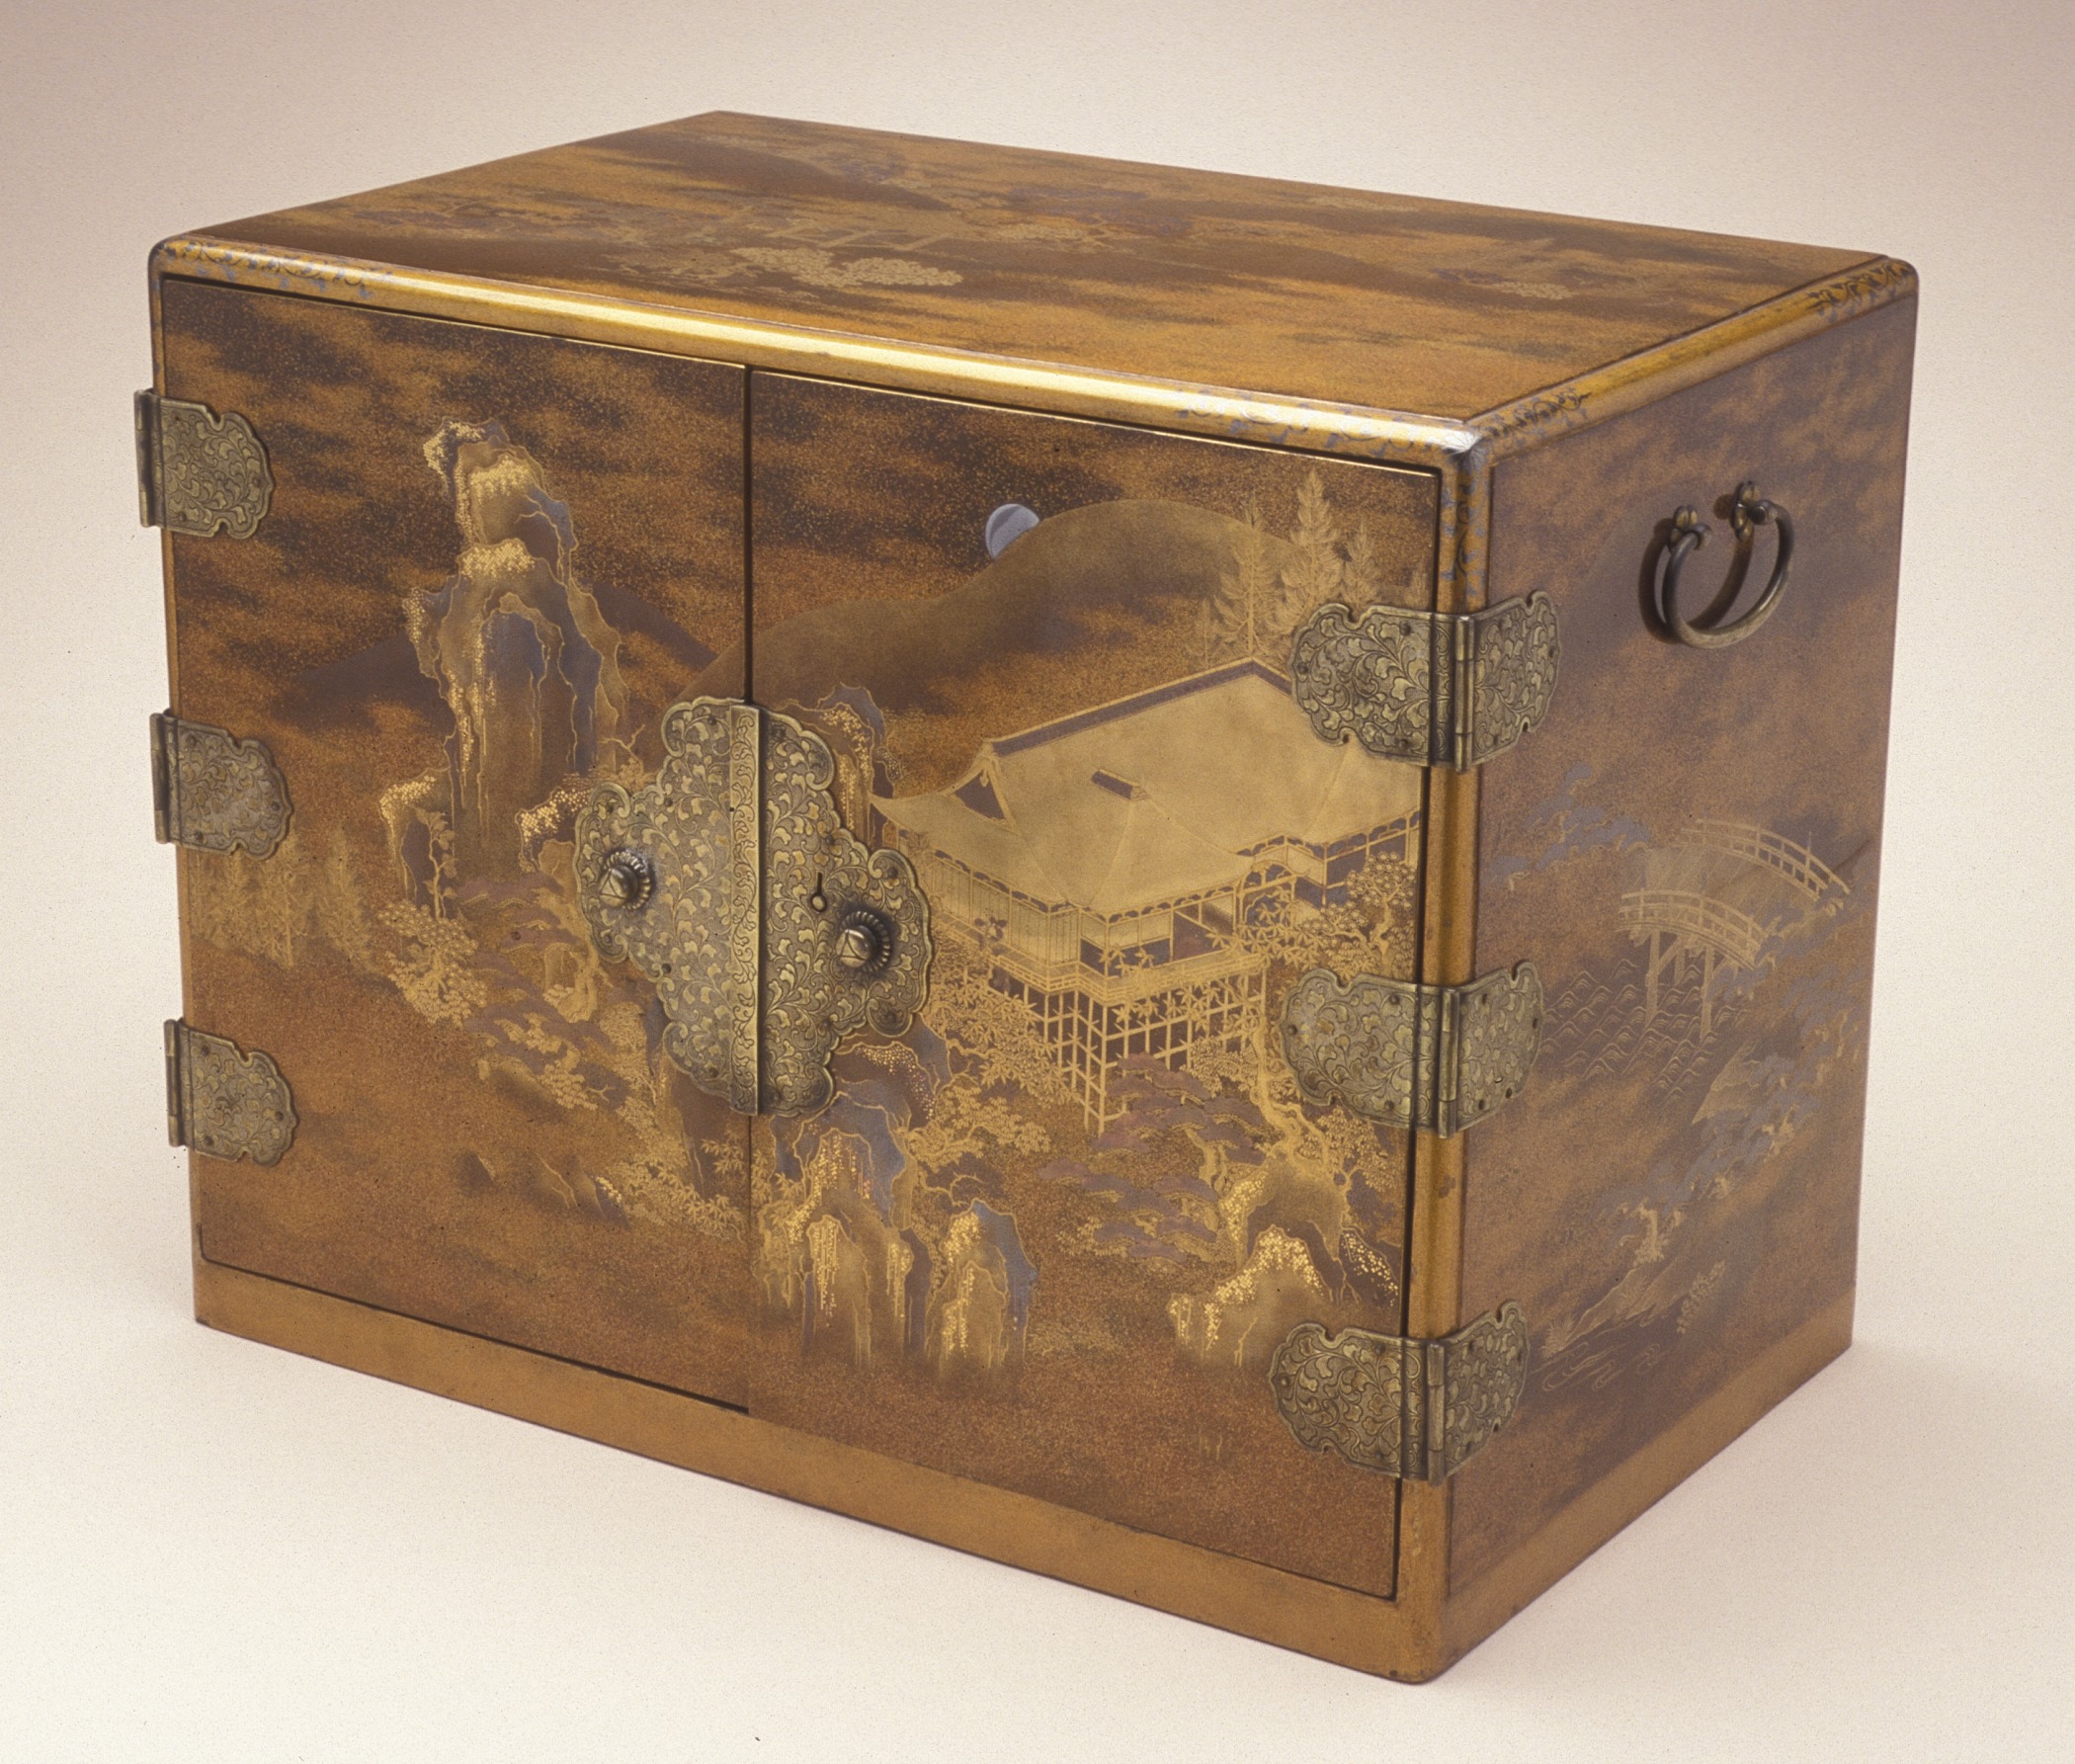 Chest, Chest with three drawers, the outside is decorated with dragons.,  anonymous, Japan, 1800 - 1900, Edo-period (1600-1868), metal, h 17 cm × w  20.2 cm × d 13.6 cm Stock Photo - Alamy